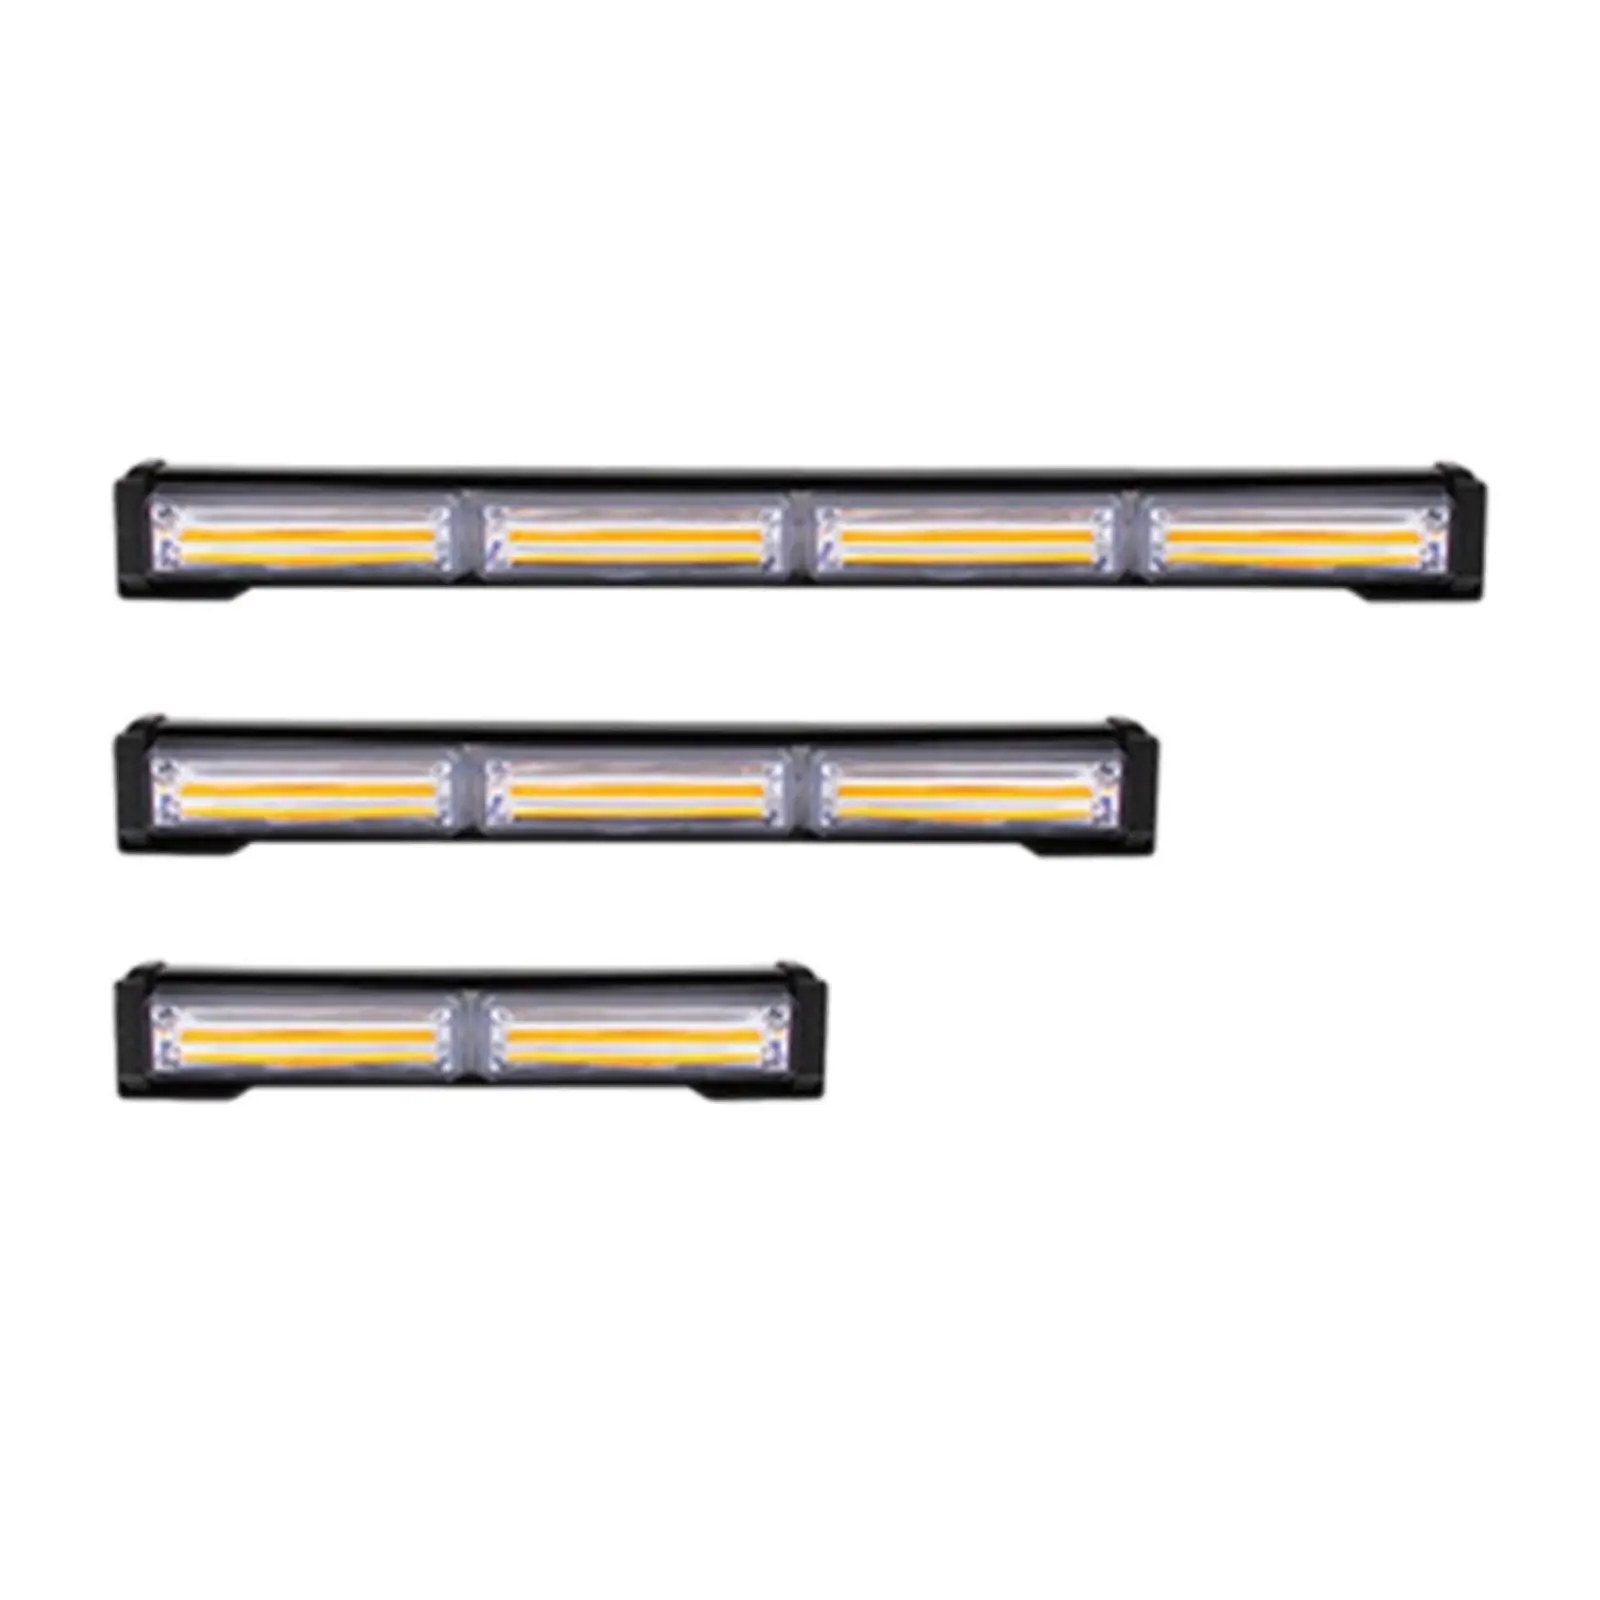 LED Strobe Flashing Light Bar High Intensity Universal Generic for Truck Vehicle Car Trailer Roof Off Road Vehicle